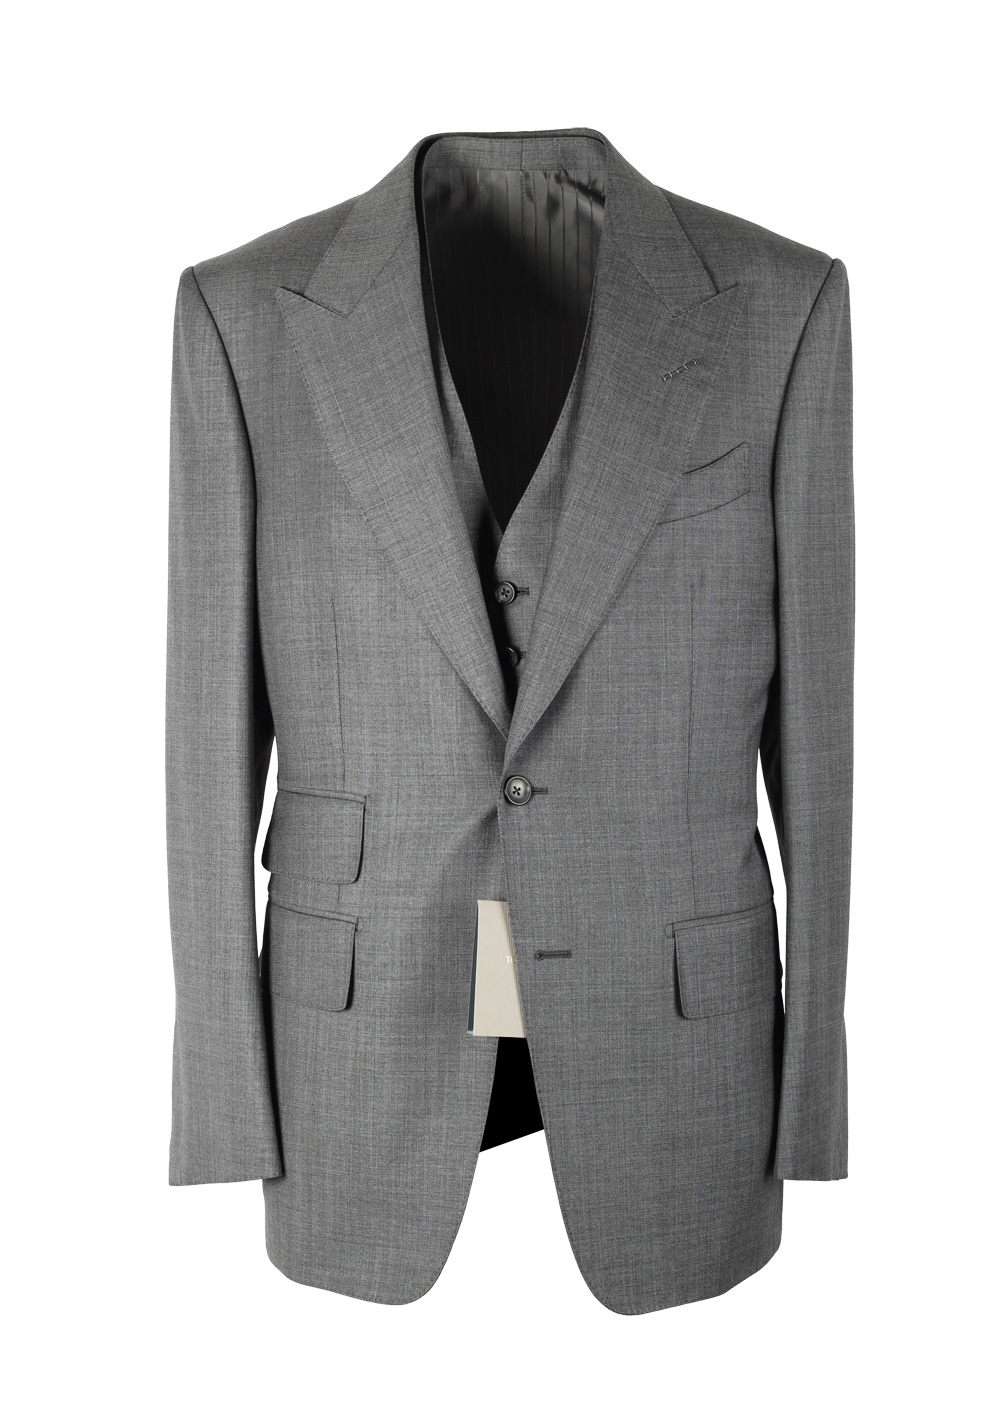 TOM FORD Windsor Signature Solid Gray 3 Piece Suit | Costume Limité